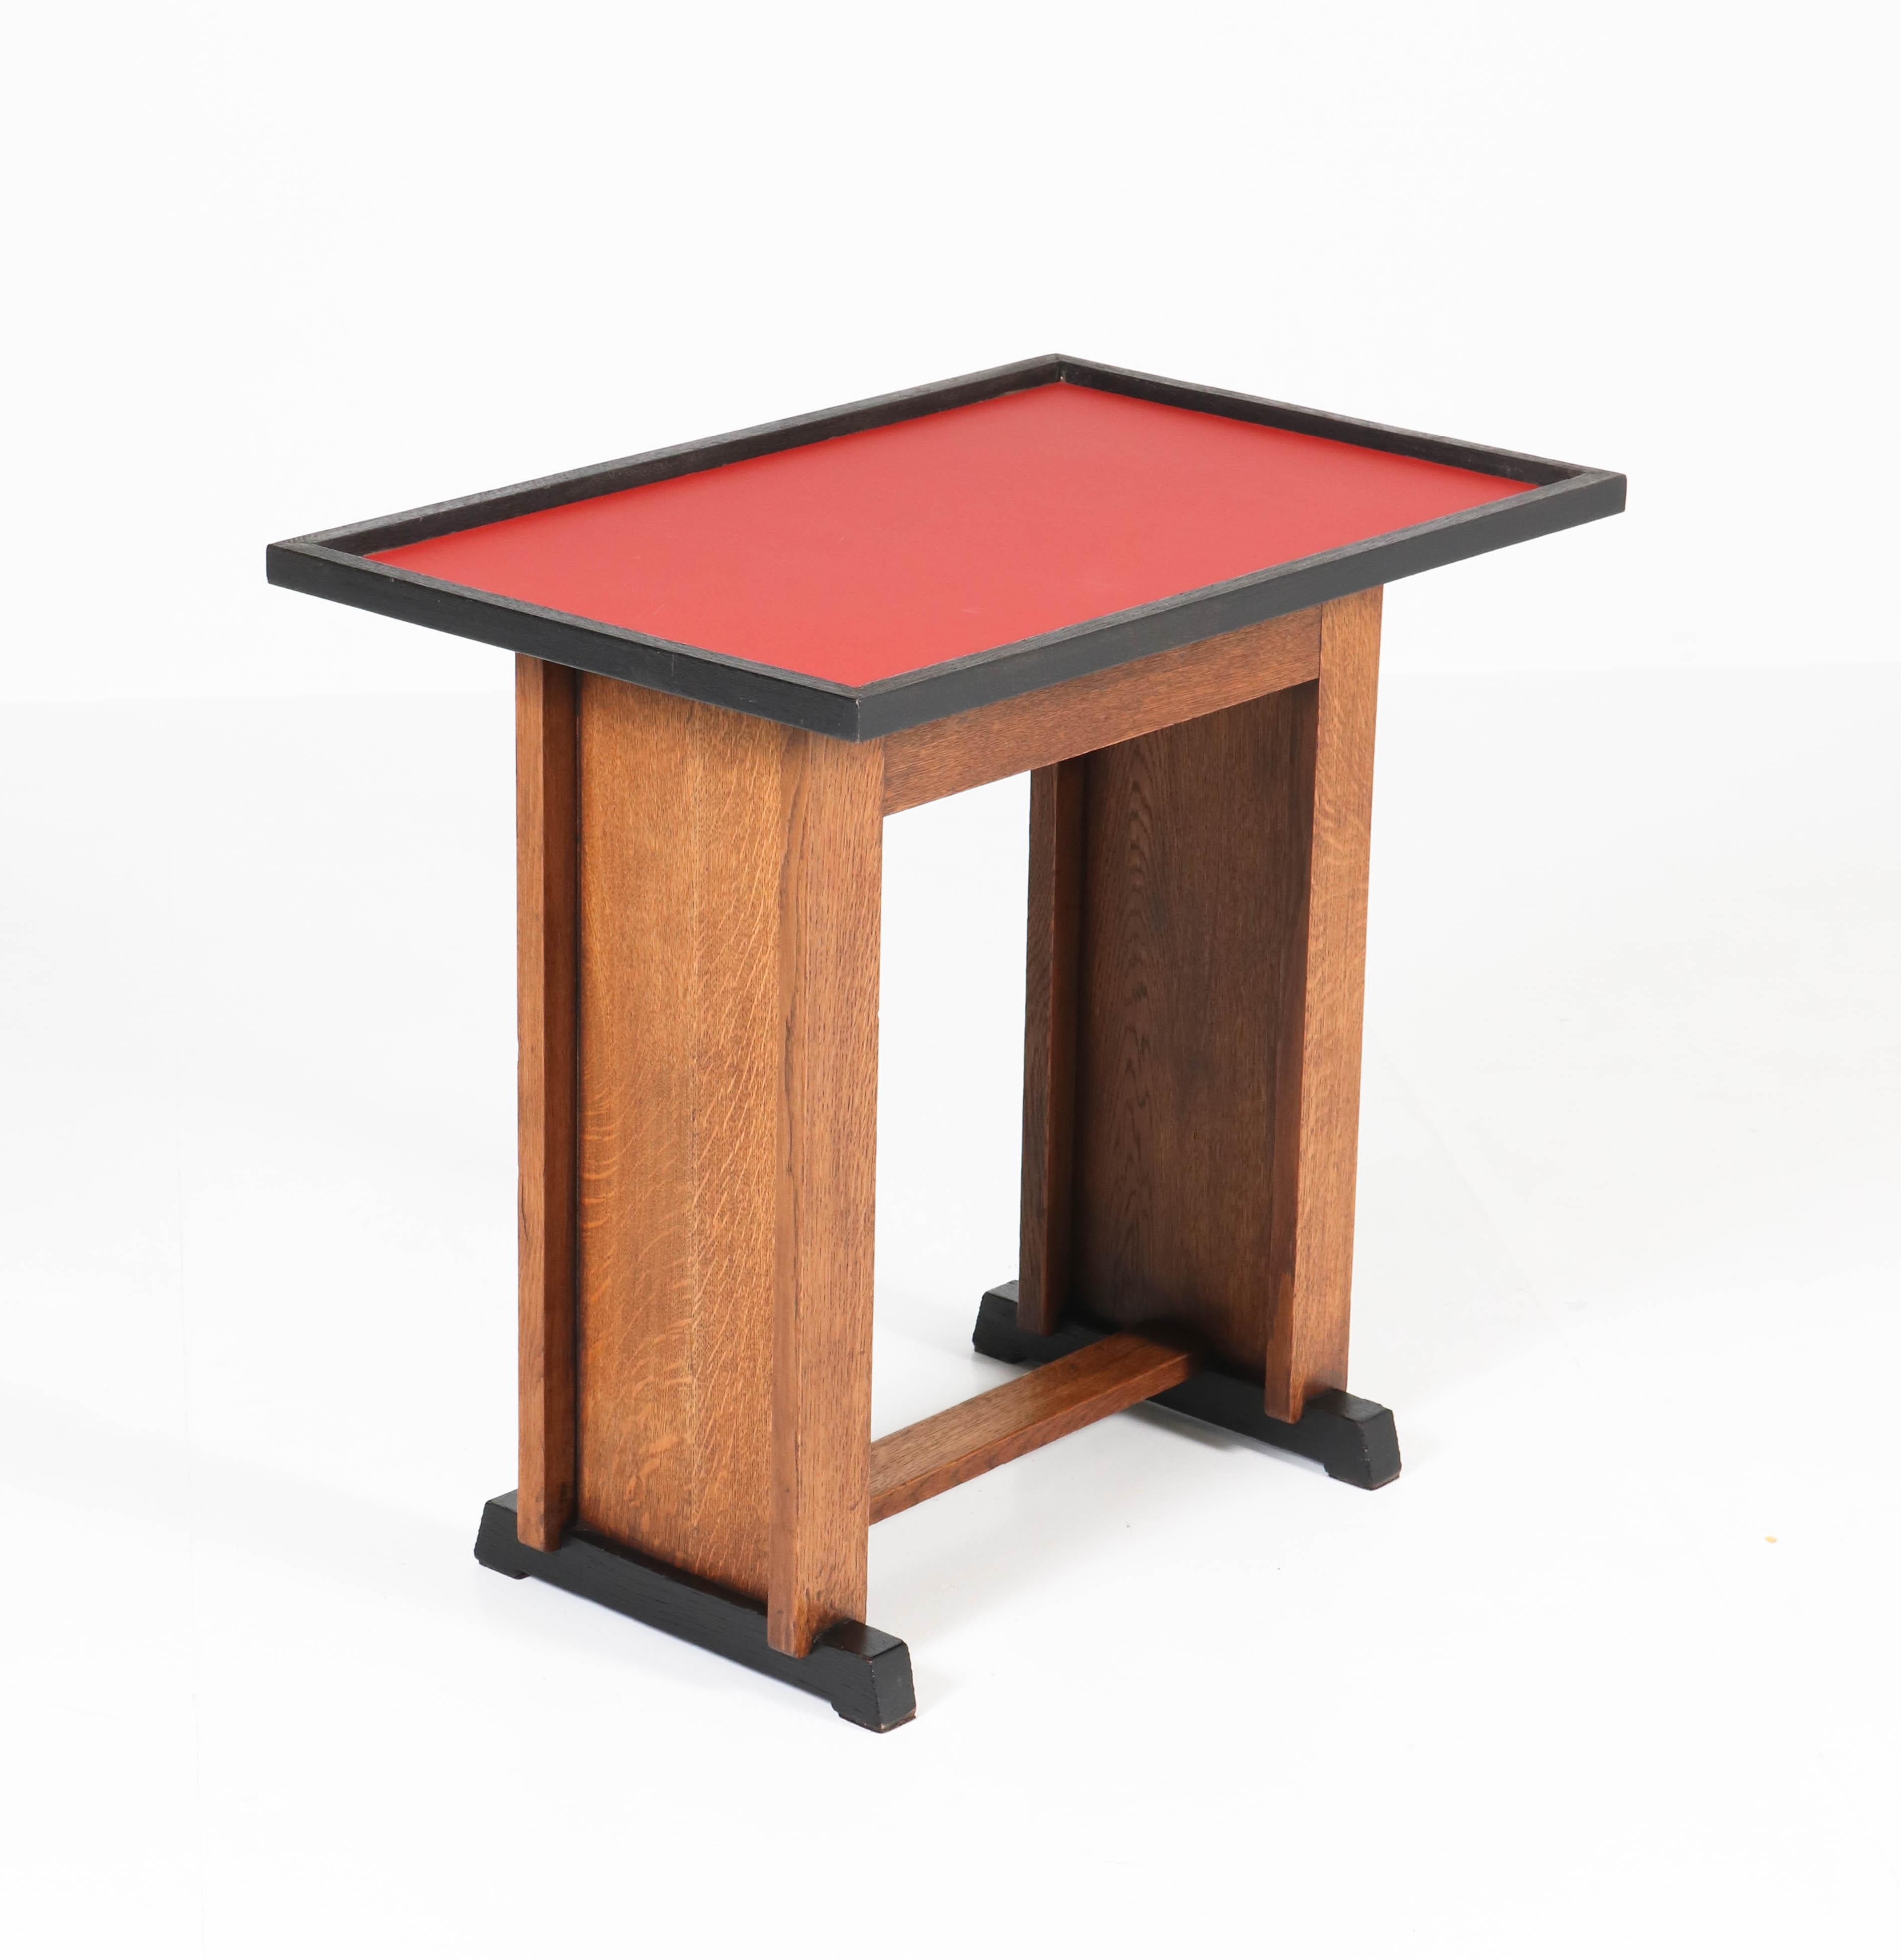 Offered by Amsterdam Modernism:
Rare and stunning Art Deco Haagse School serving table.
Striking Dutch design by Jan Brunott from the 1920s.
Solid oak with red linoleum top.
Marked with original metal tag.
In good original condition with minor wear